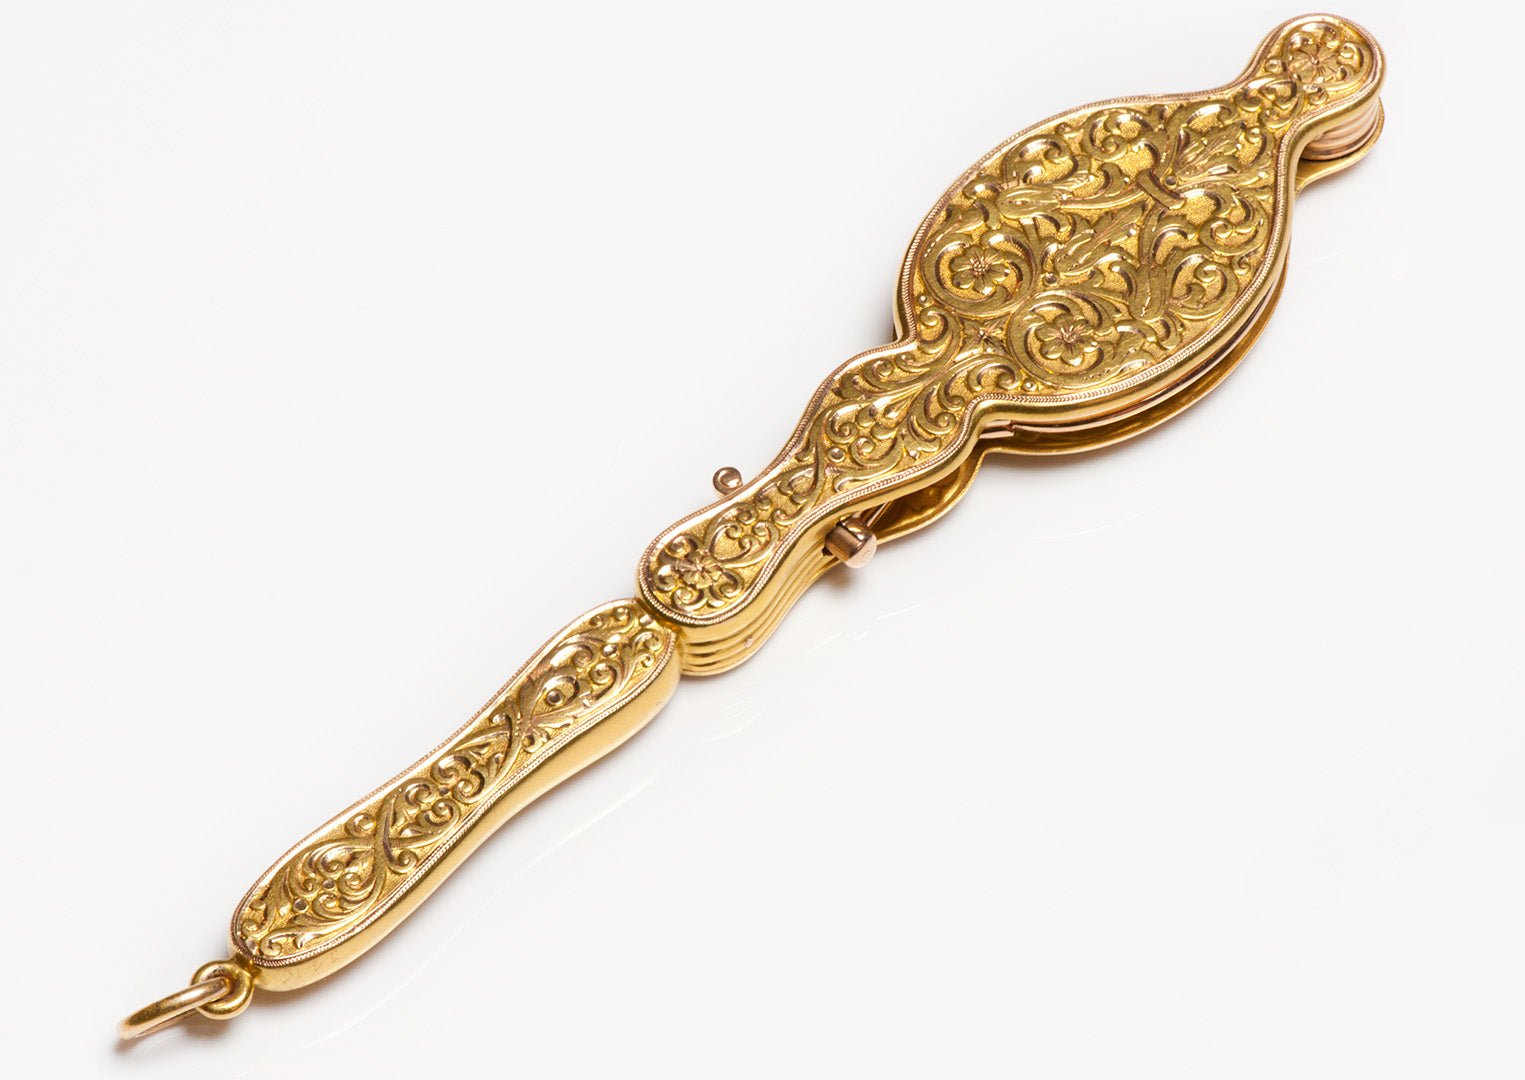 Antique Tiffany & Co. Gold Lorgnette - DSF Antique Jewelry